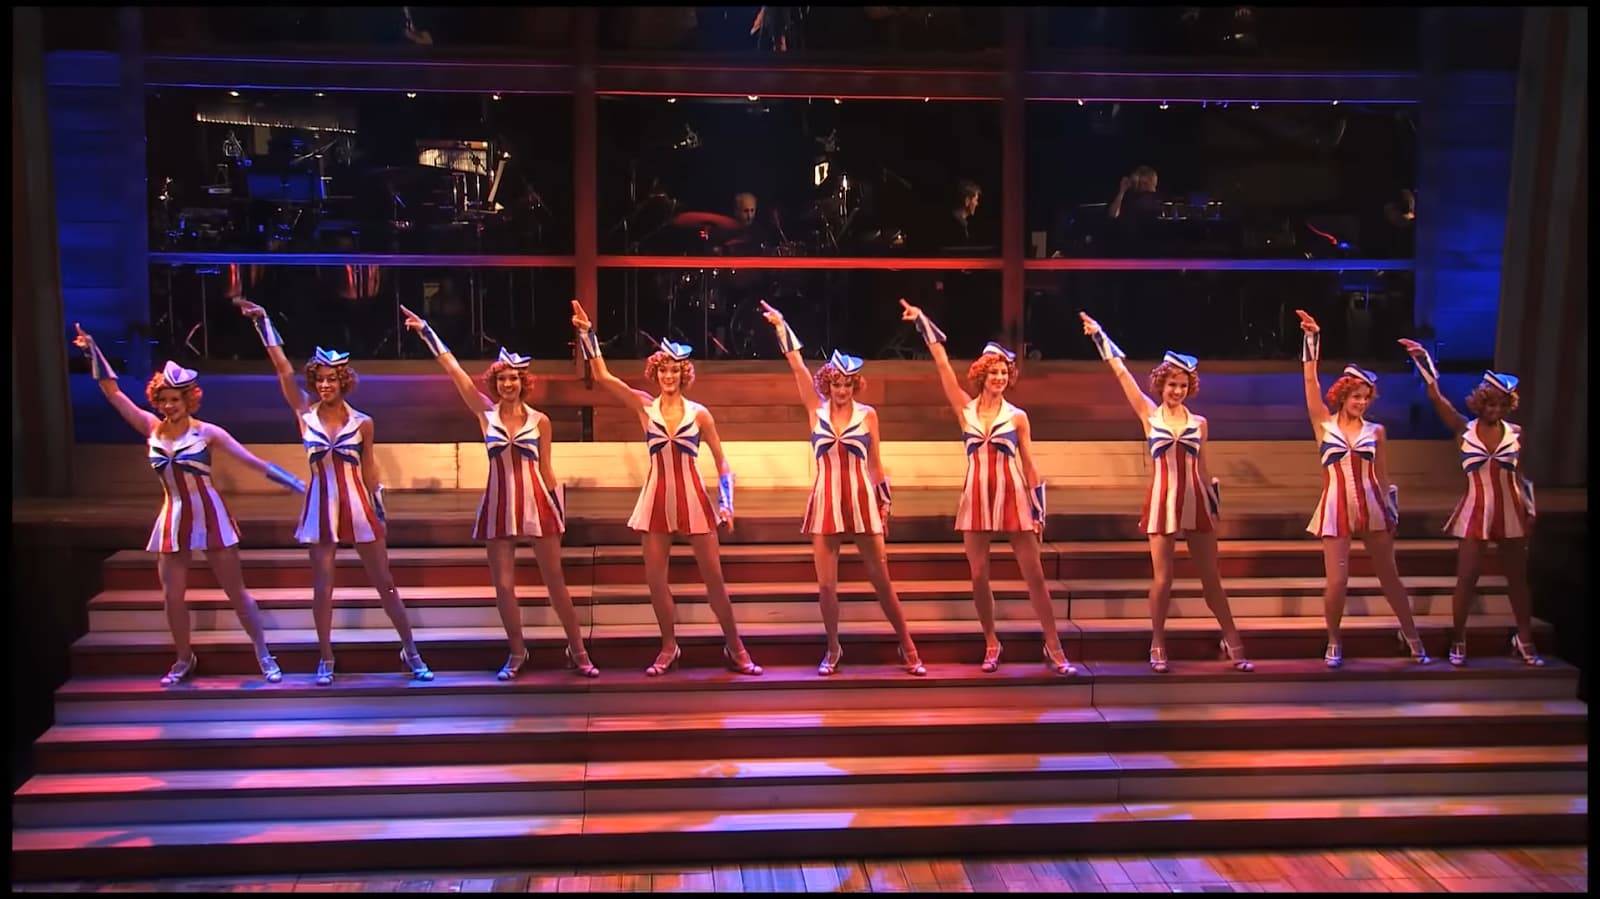 A group of performers in sailor-themed outfits strike a pose on stage